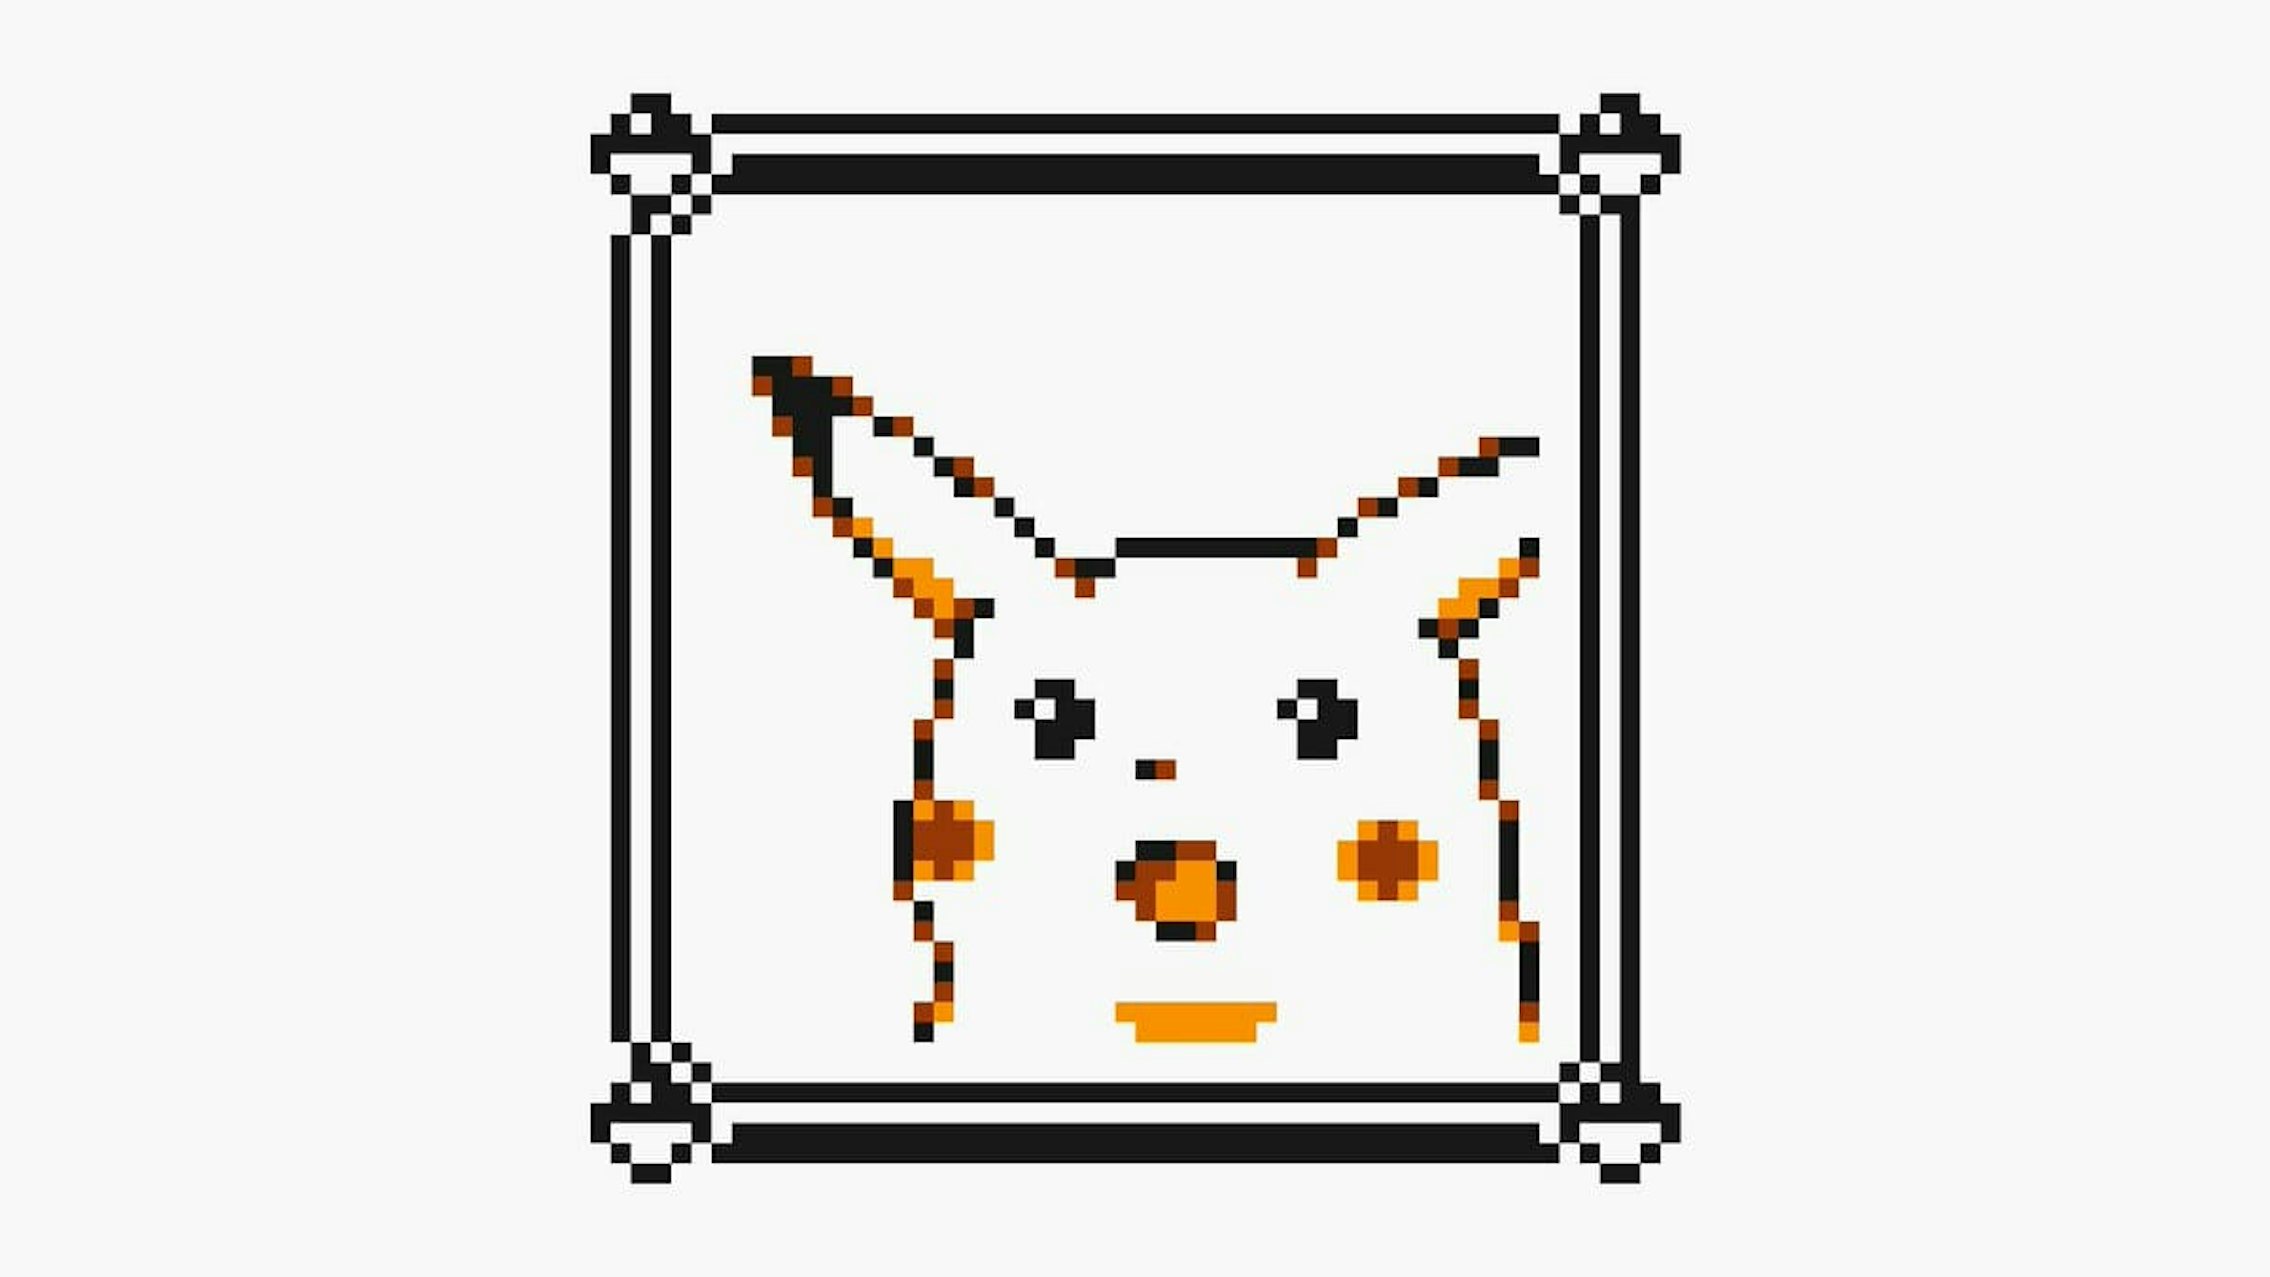 Was the 'Surprised Pikachu' Meme a Stealth Marketing Campaign?